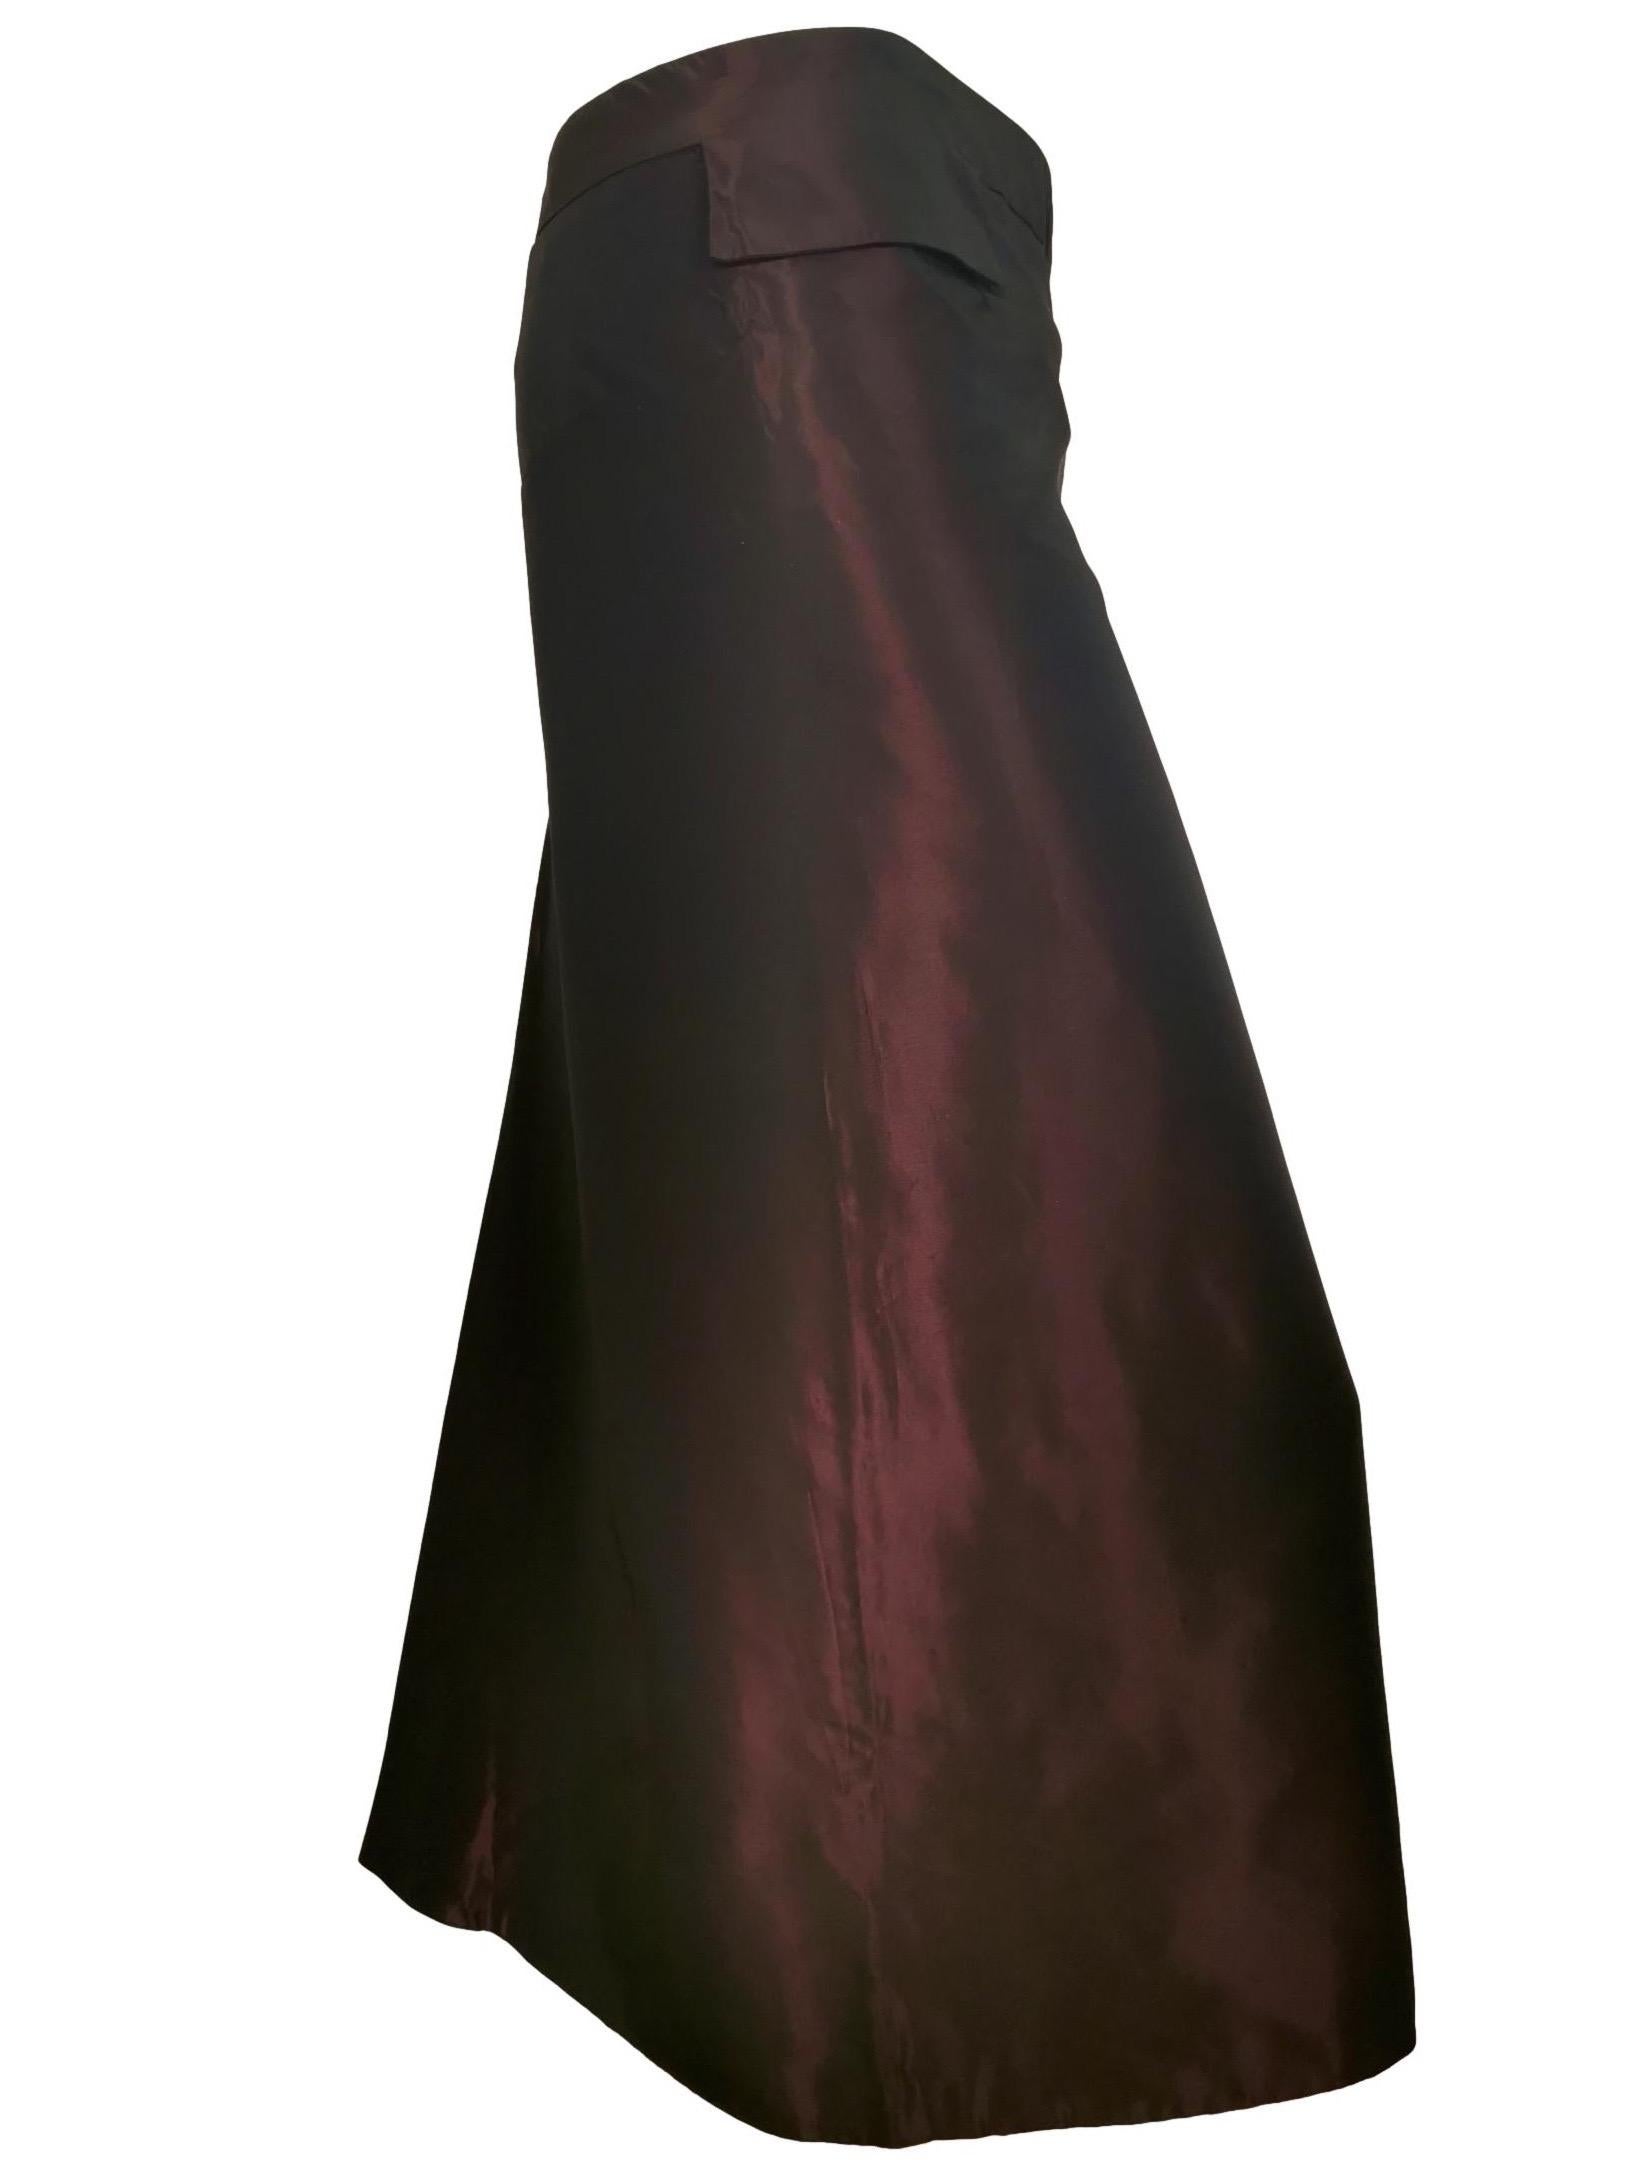 Alexander McQueen Two Tone Kick Pleat Fitted Skirt 1996 For Sale 10